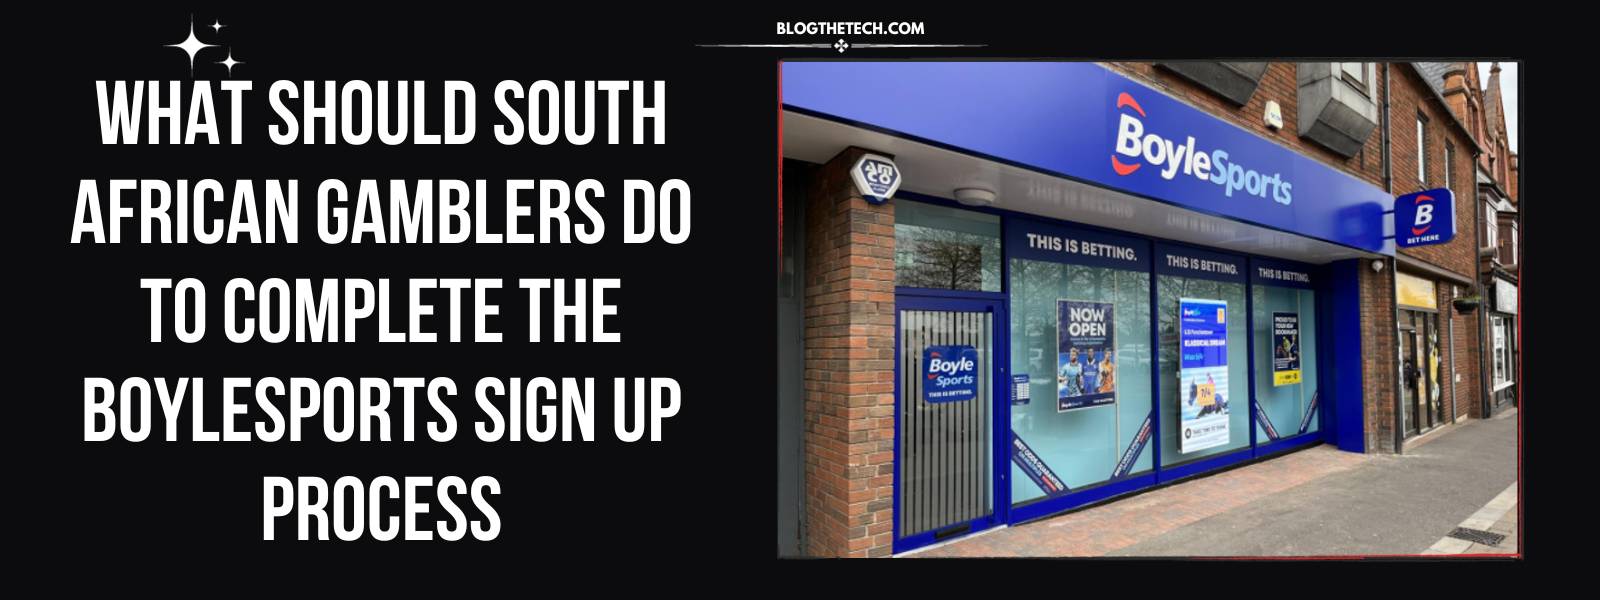 What should South African gamblers do to complete the BoyleSports Sign Up Process